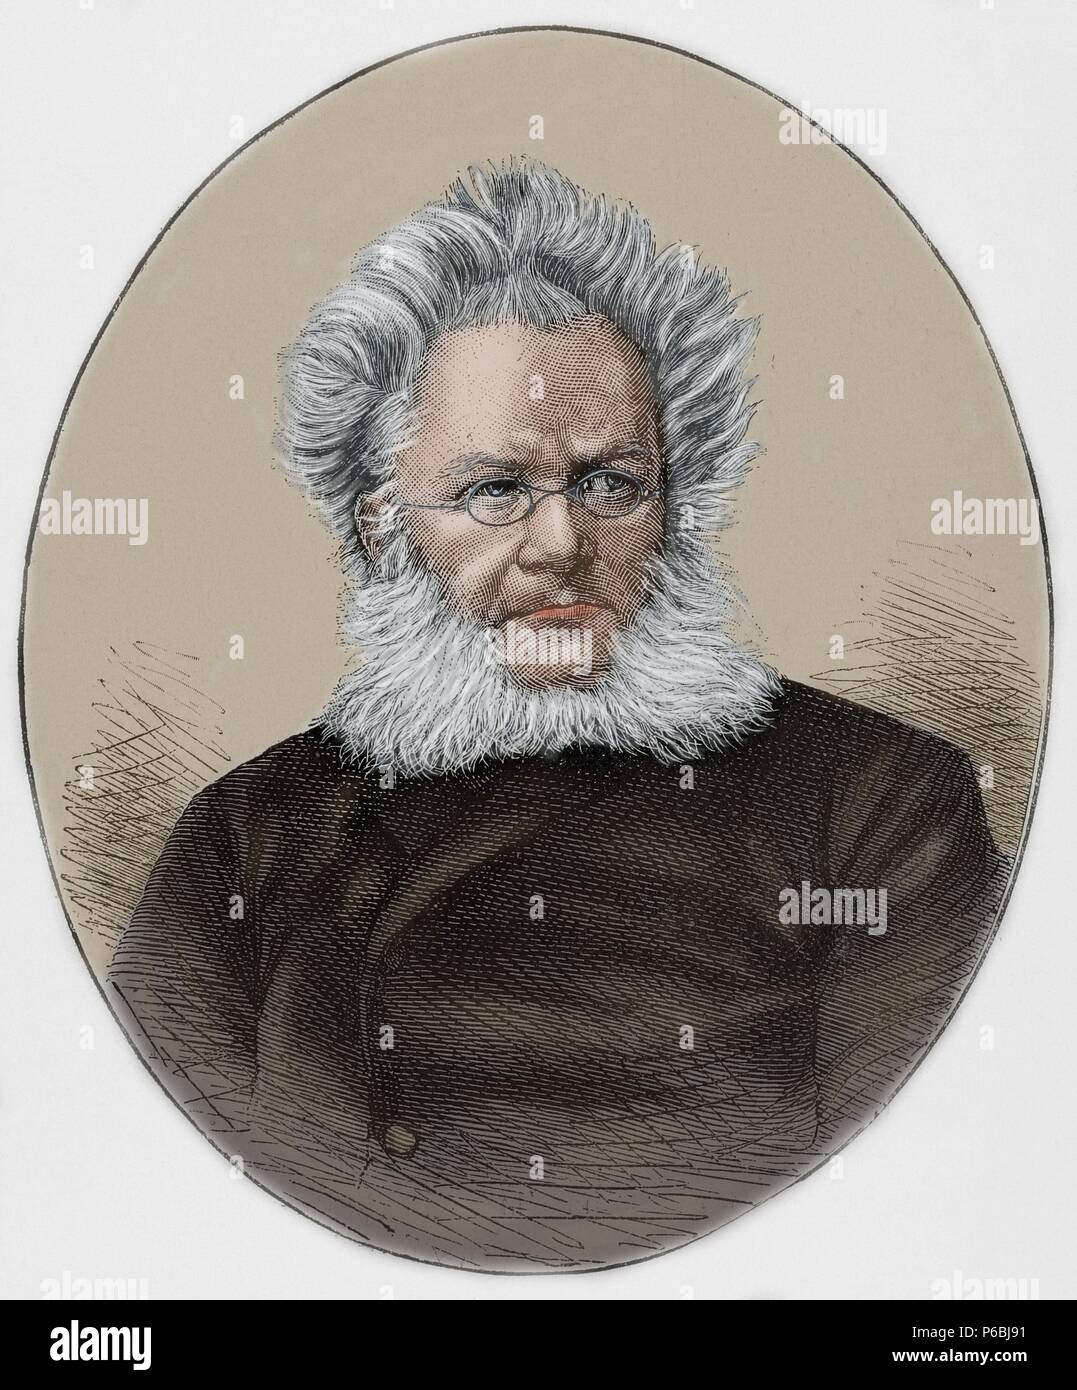 Henrik Ibsen (1828-1906). Norwegian playwright. Engraving in The Catalan Illustration, 1893. Colored. Stock Photo